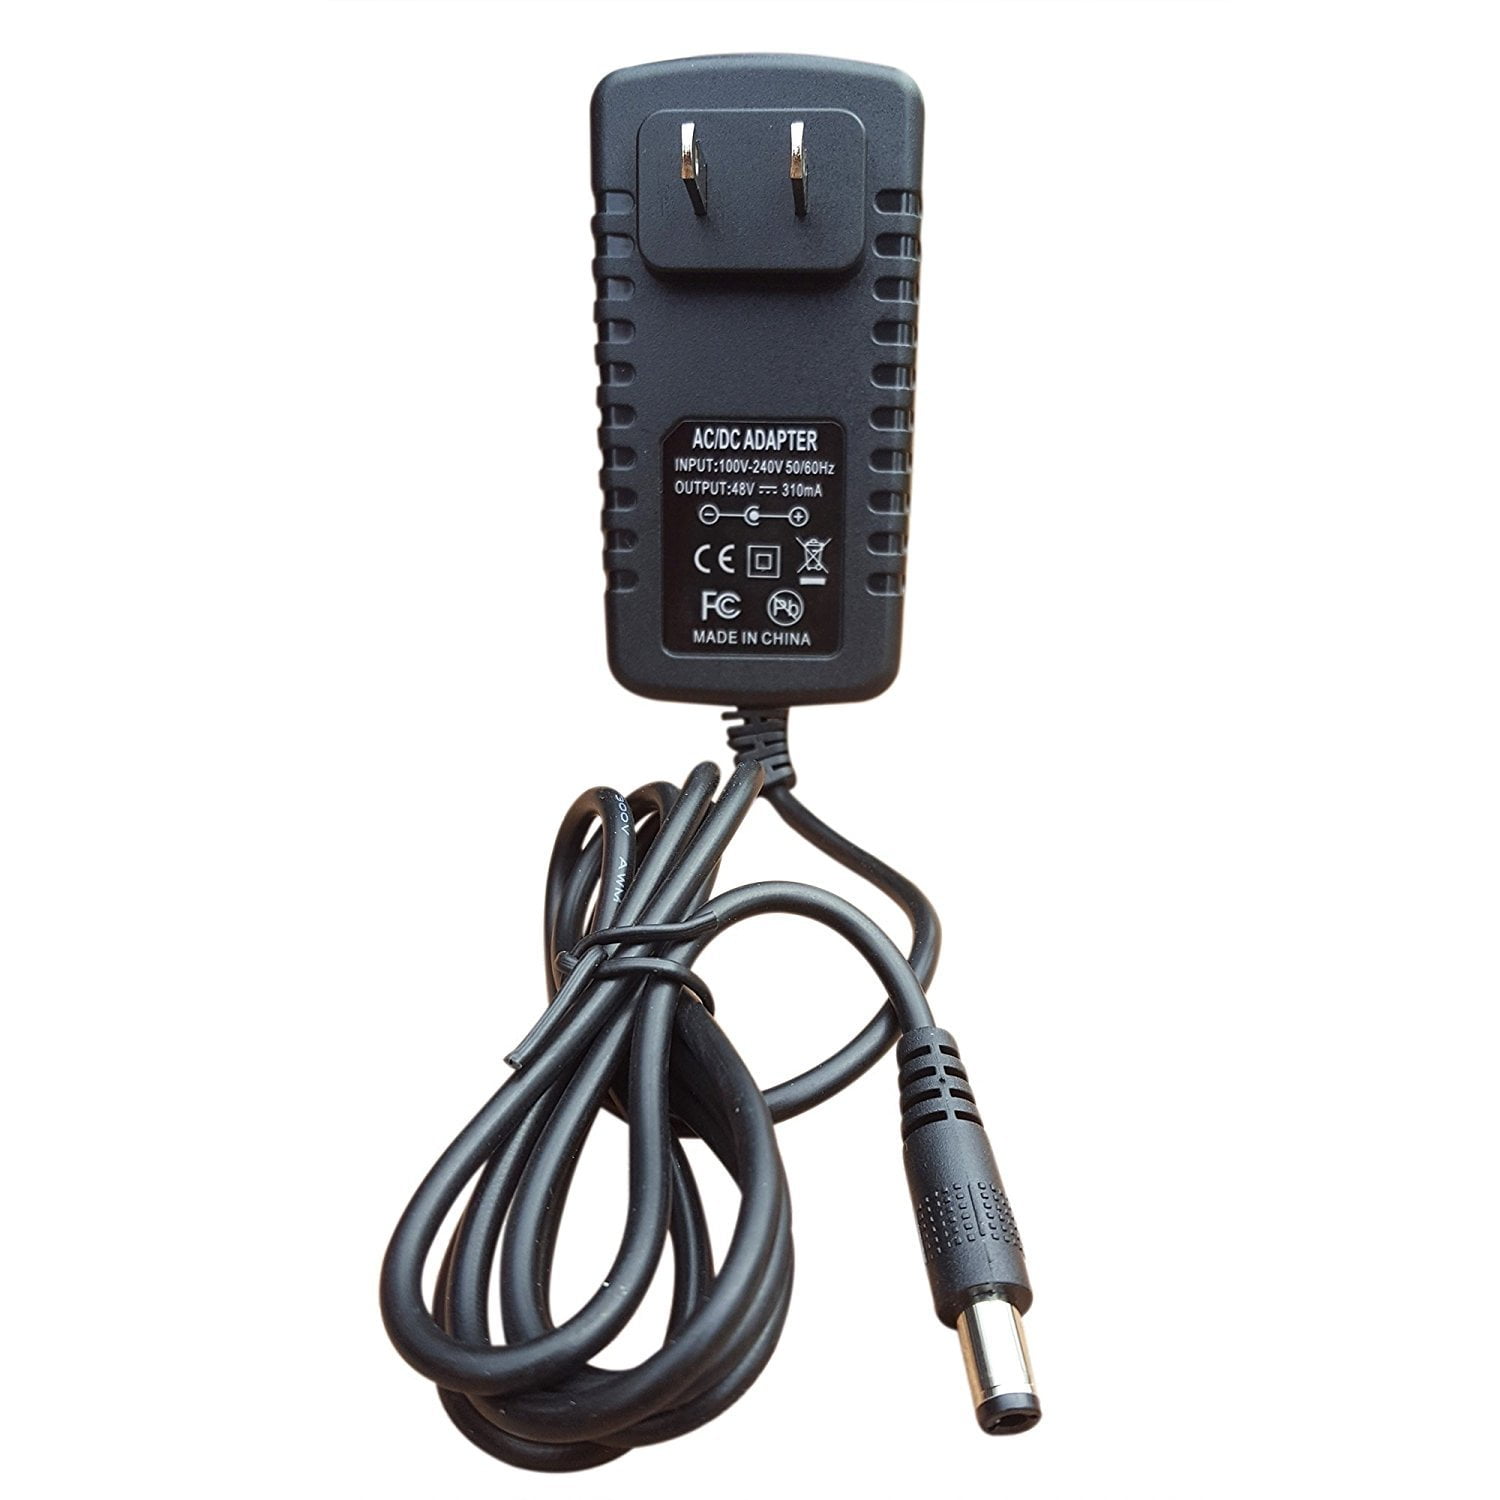 NEW 48V Power Supply for Polycom VVX Series IP Phone includes power cord